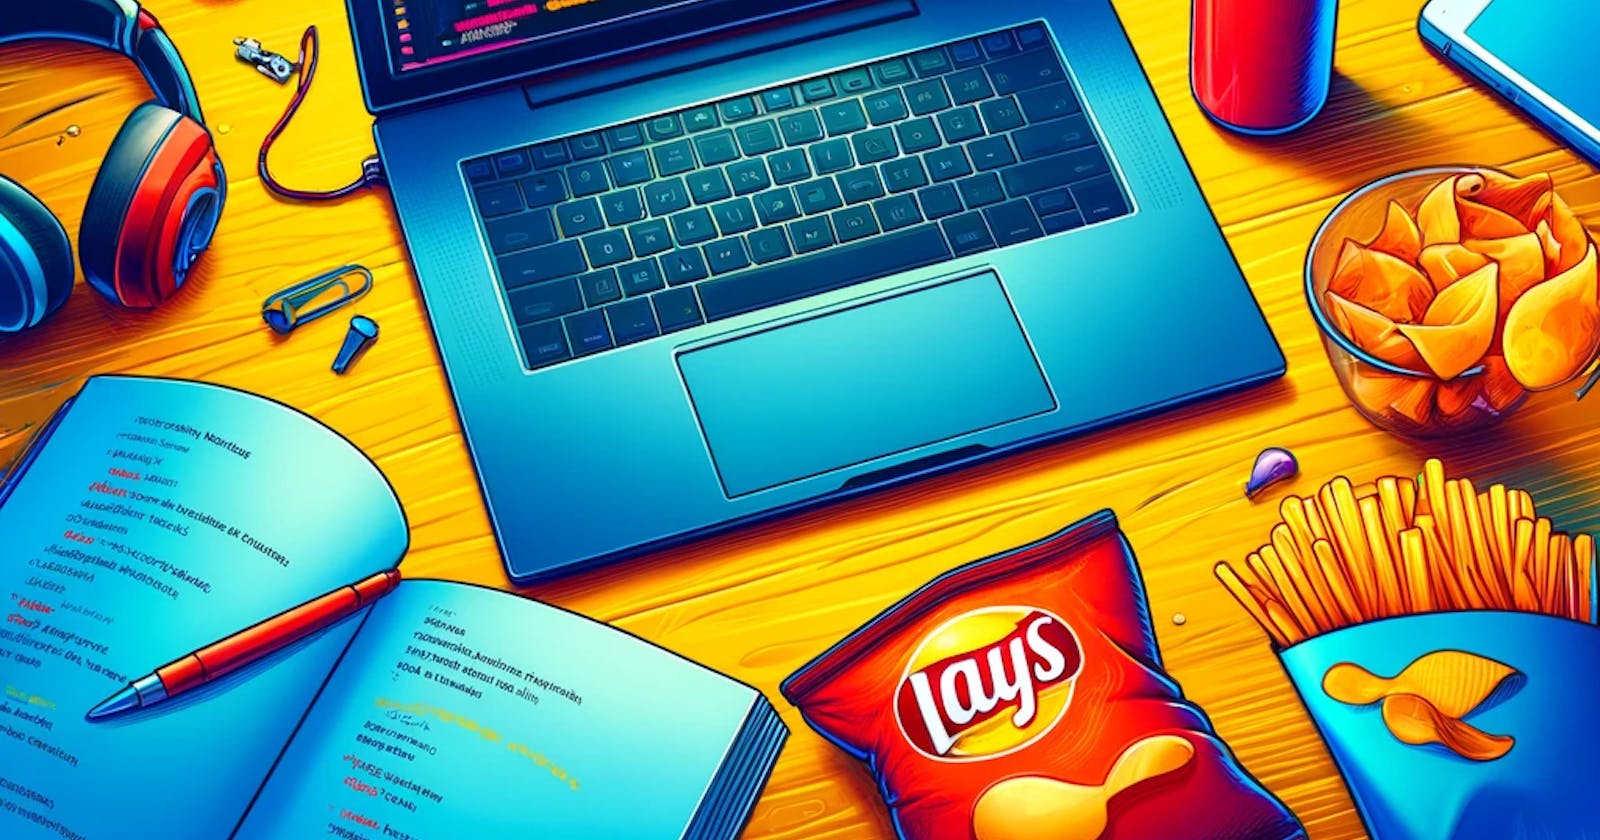 Code, Soccer, and Late-Night Snacks: